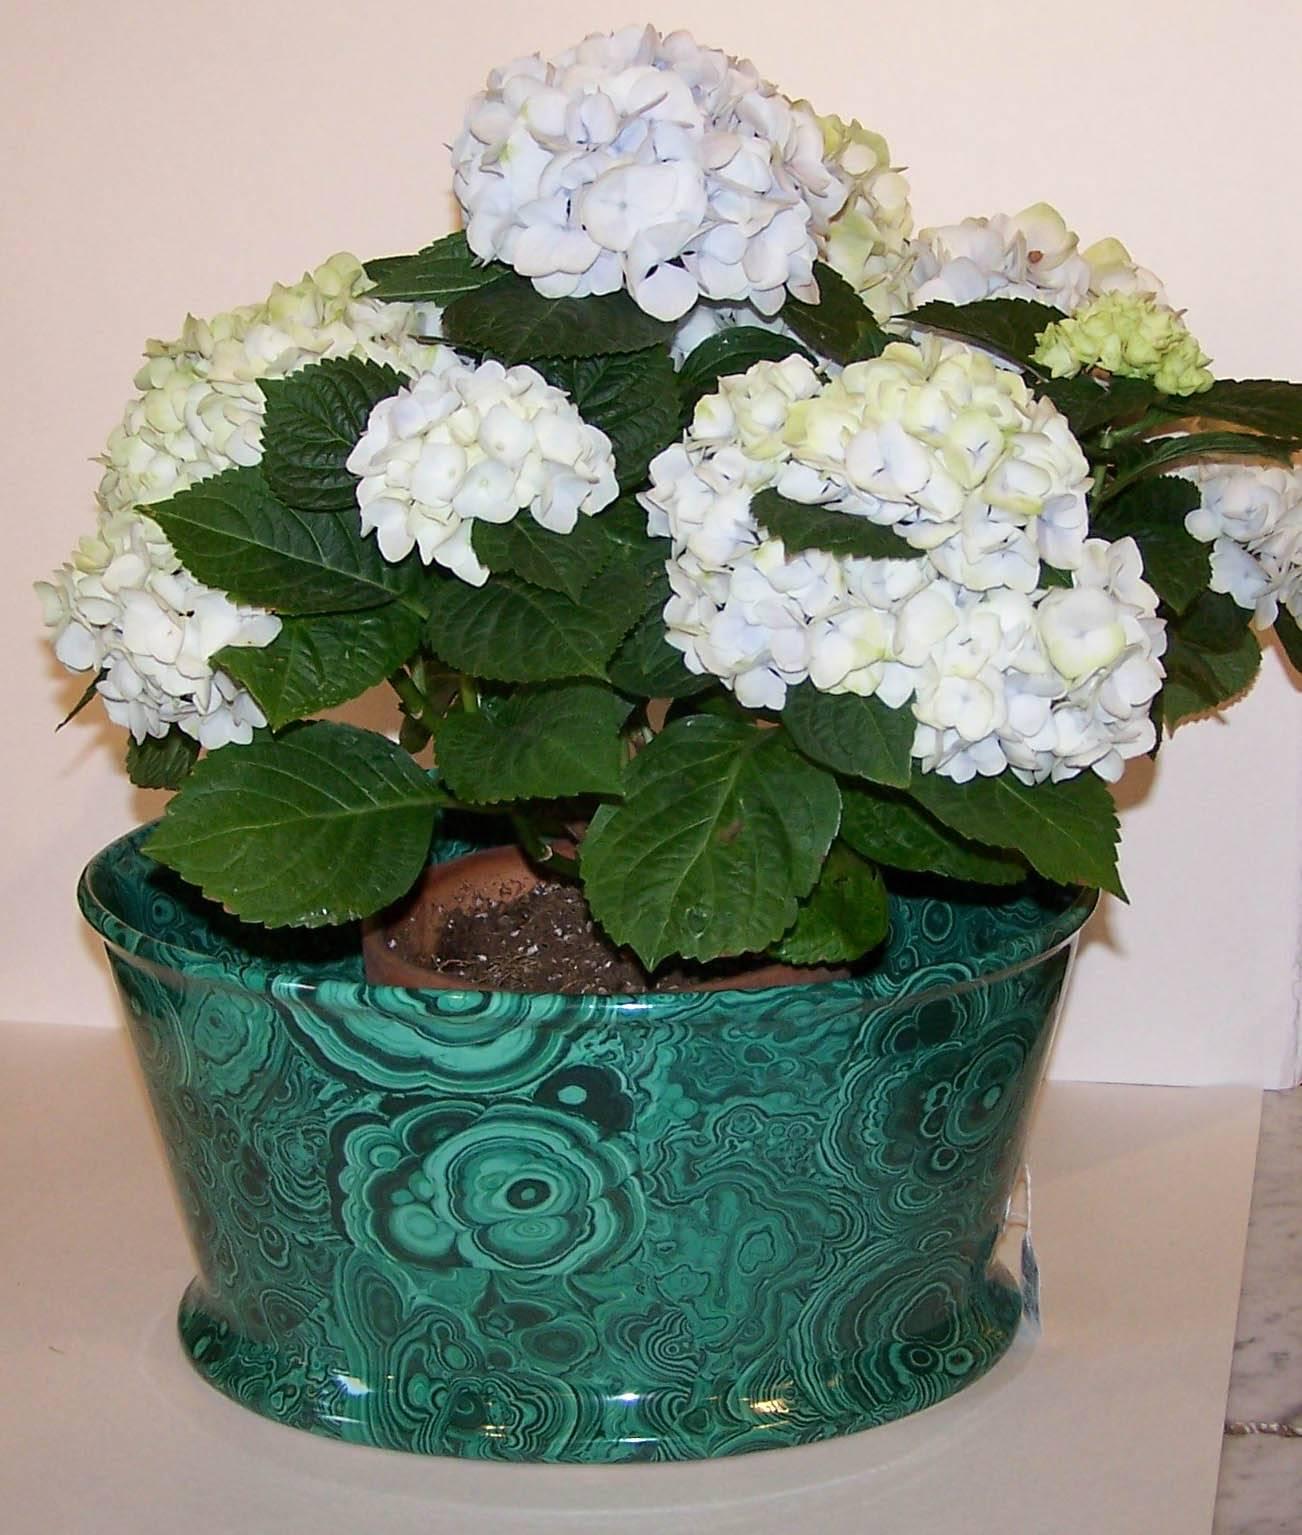 We are pleased to offer this large porcelain planter with malachite decoration. The overall green color makes it ideal for holding flowering plants (see image #2). Any flowering plant will look great. A large orchid would work well here. An